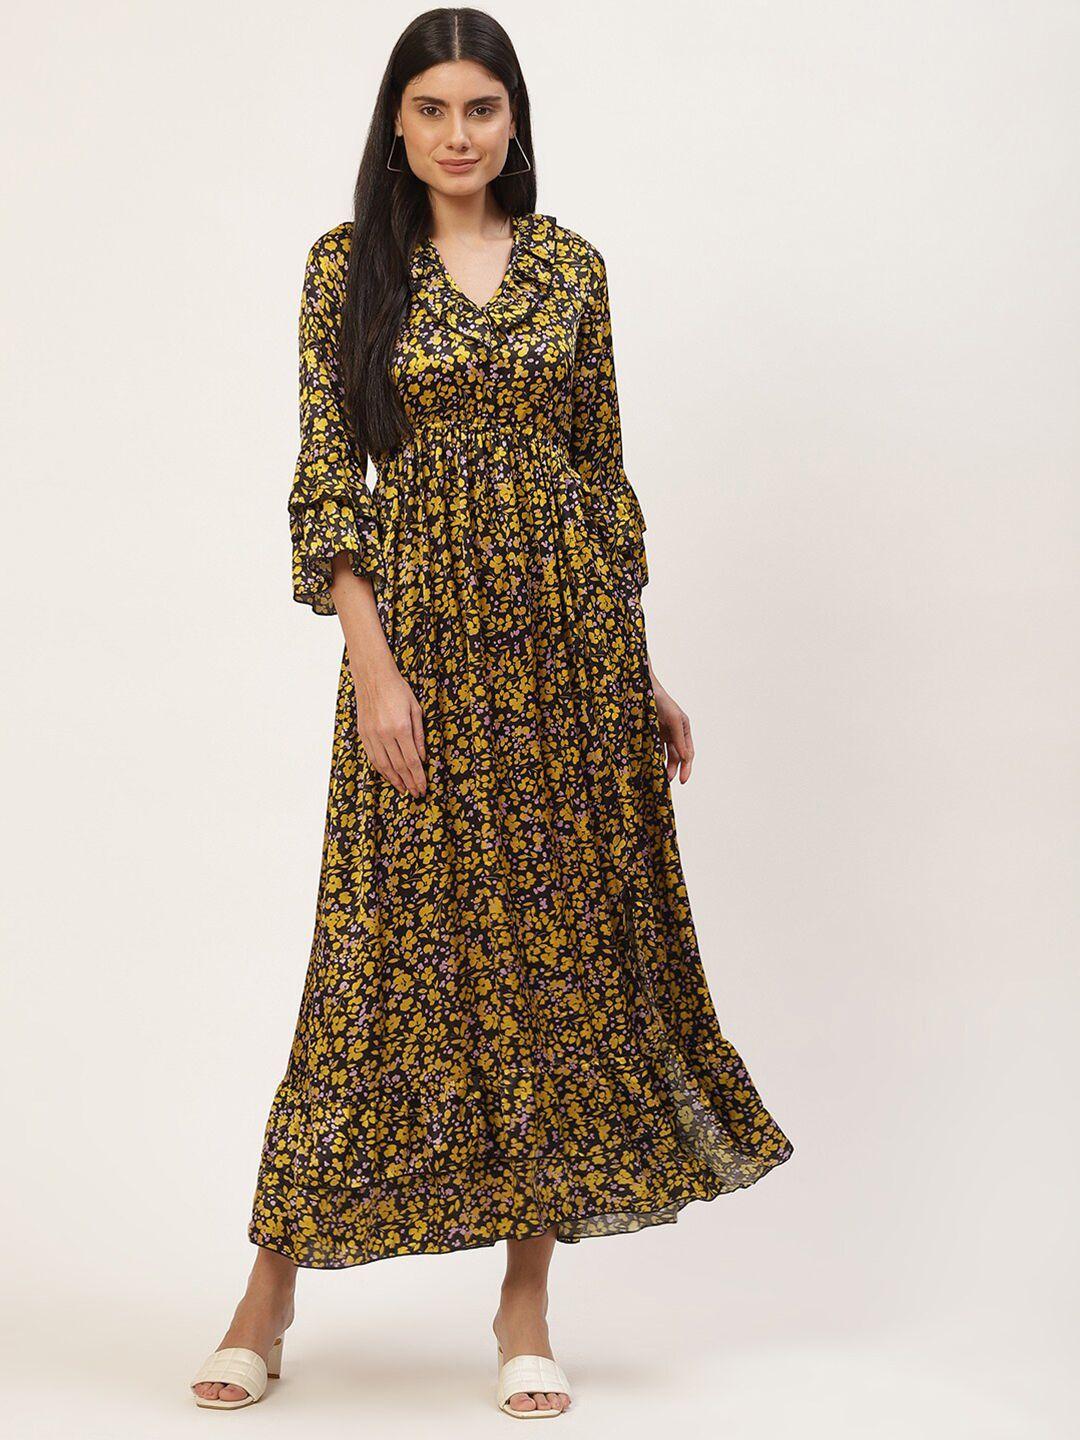 inweave-mustard-yellow-and-black-floral-printed-ruffled-bell-sleeves-maxi-dress